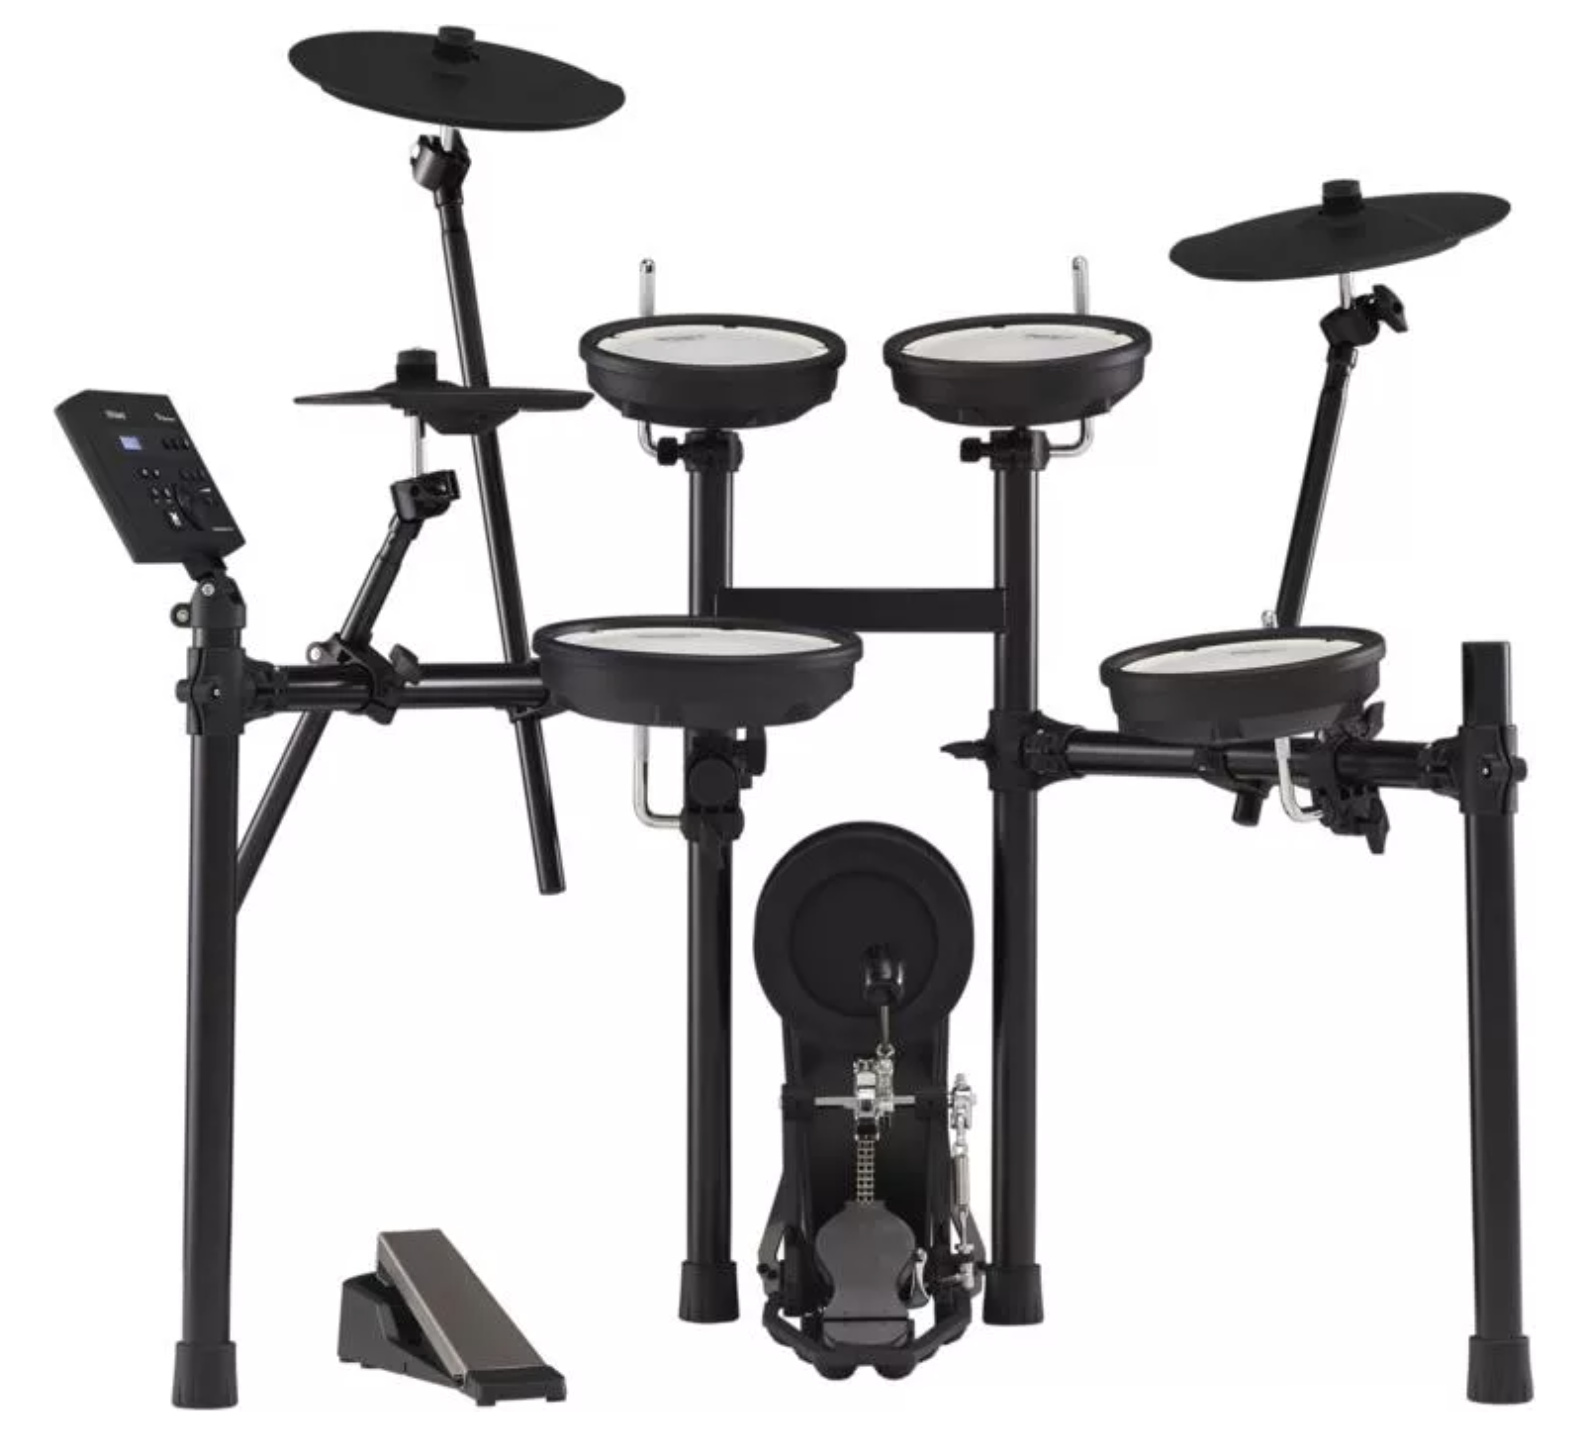 The 5 best new electronic drum kits of 2020, as voted for by you ...